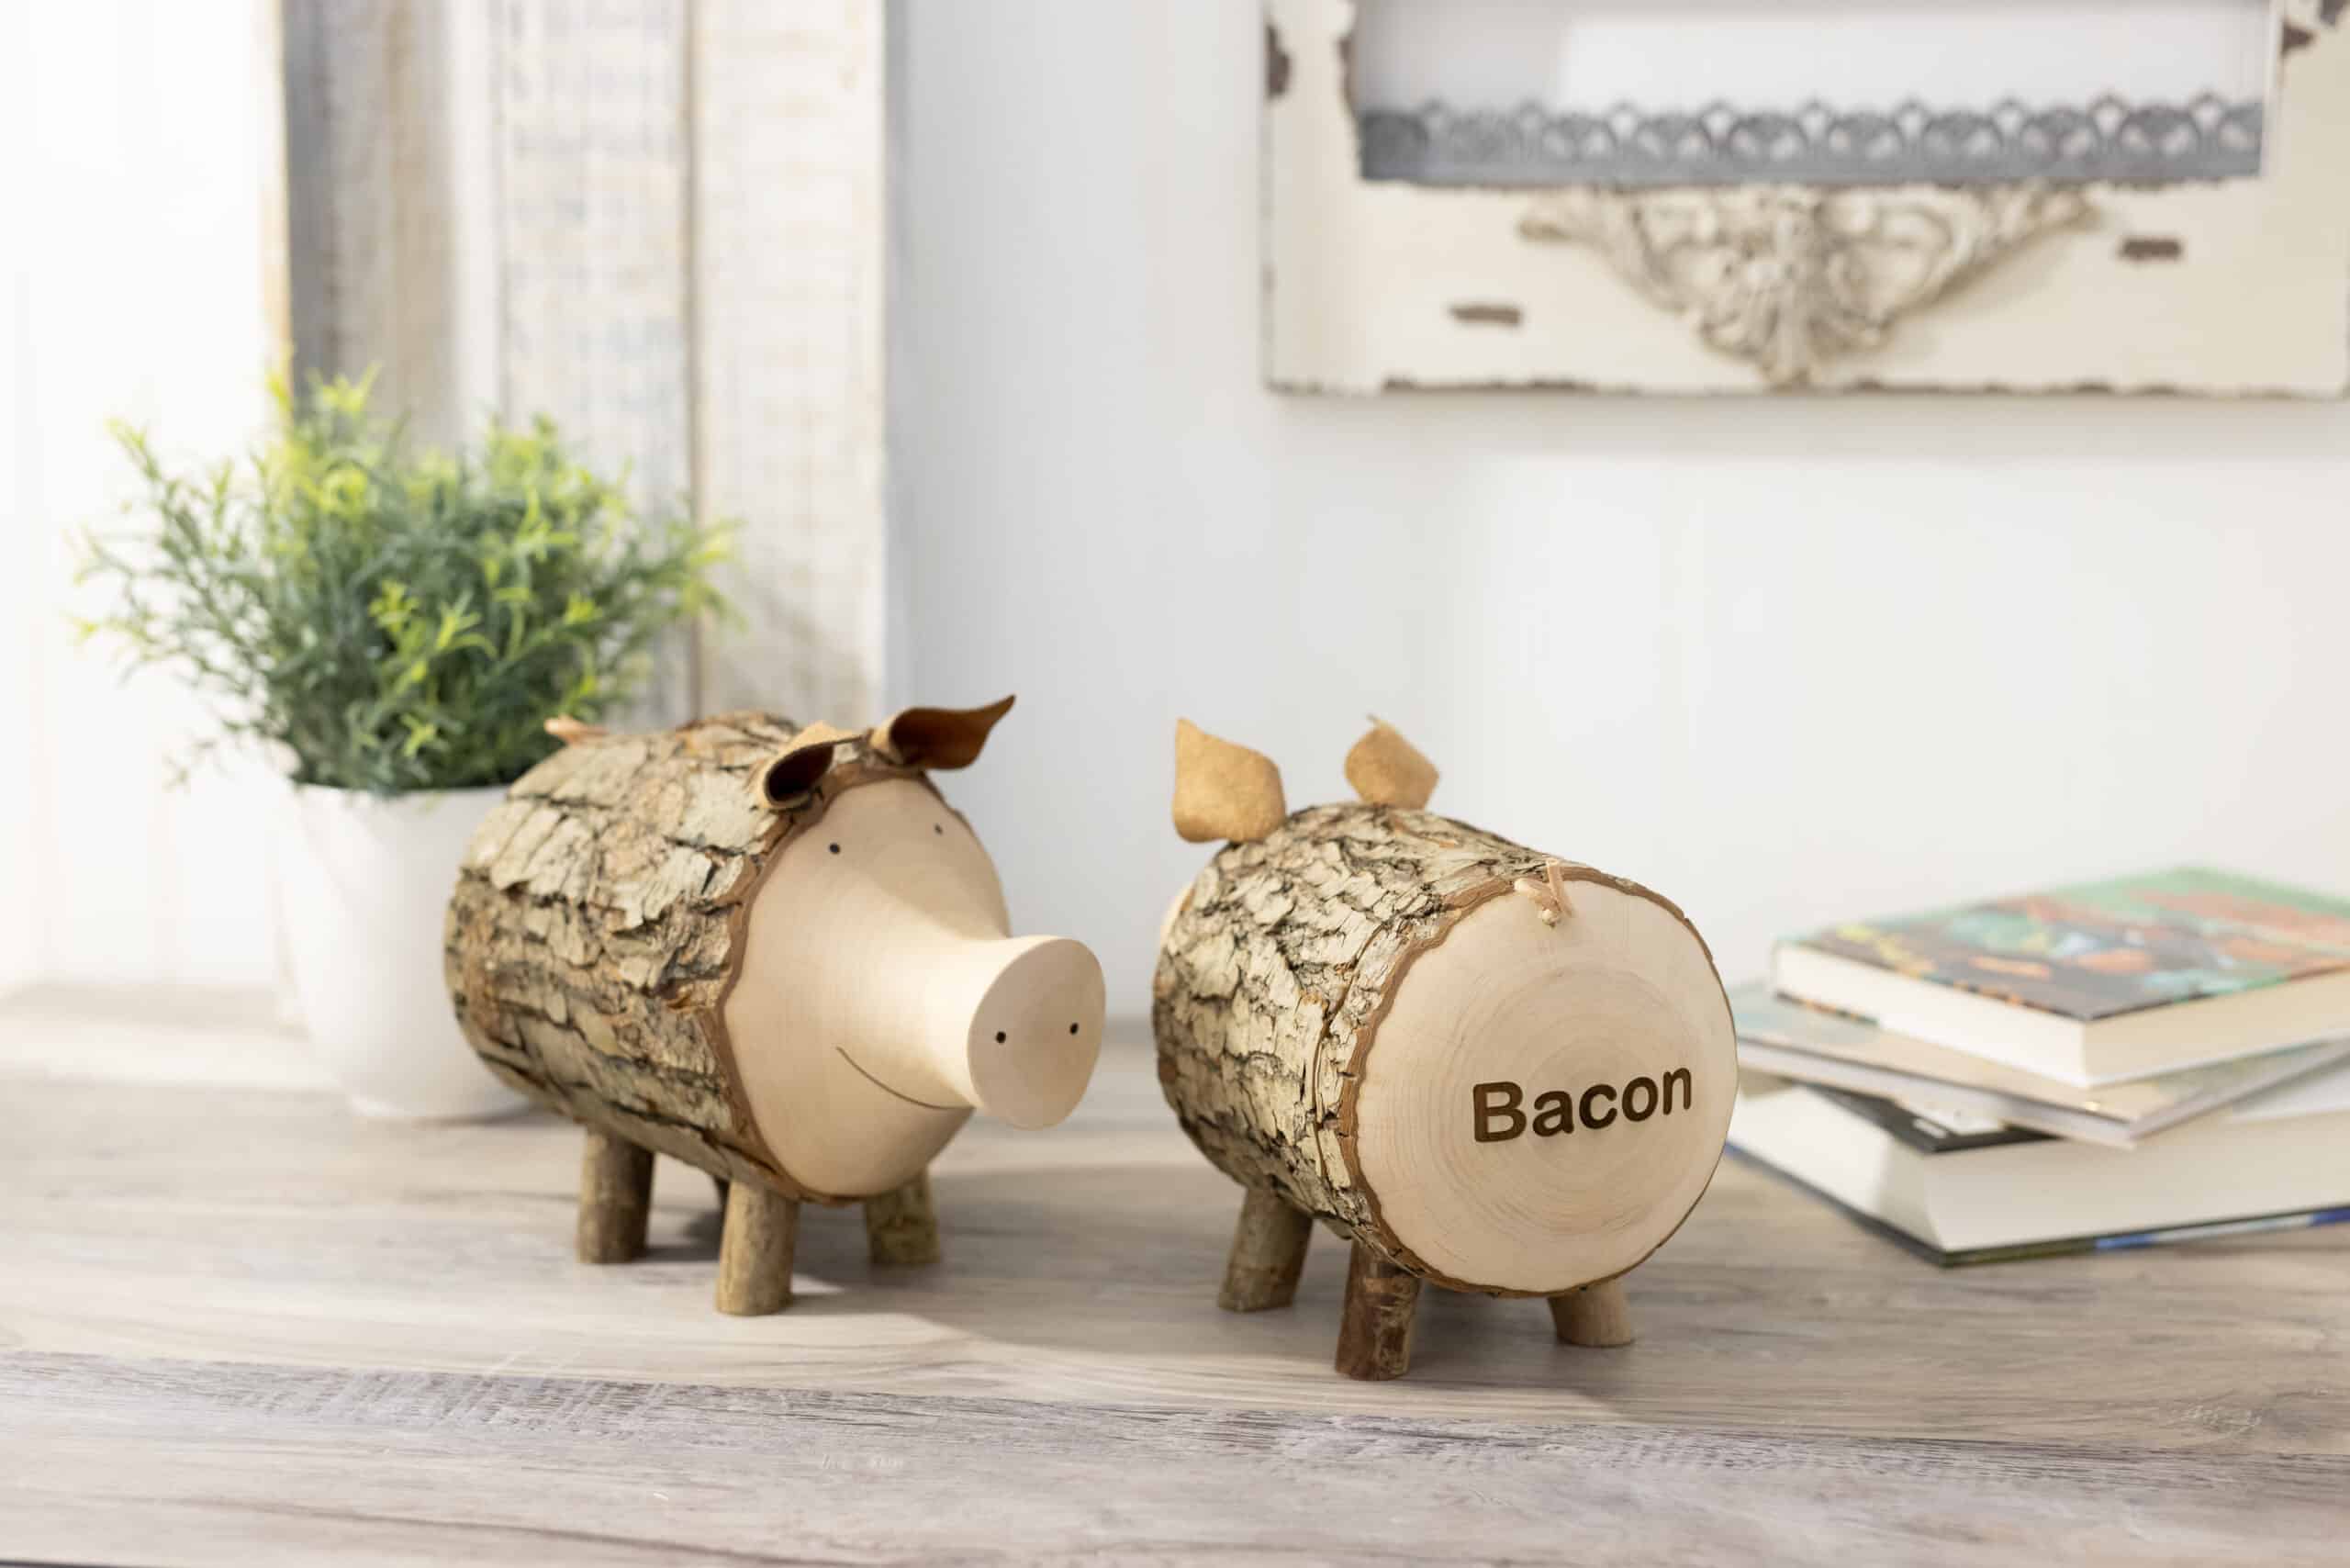 Two decorative wooden pig figurines on a table, labeled "bacon," with a plant and books in the background.